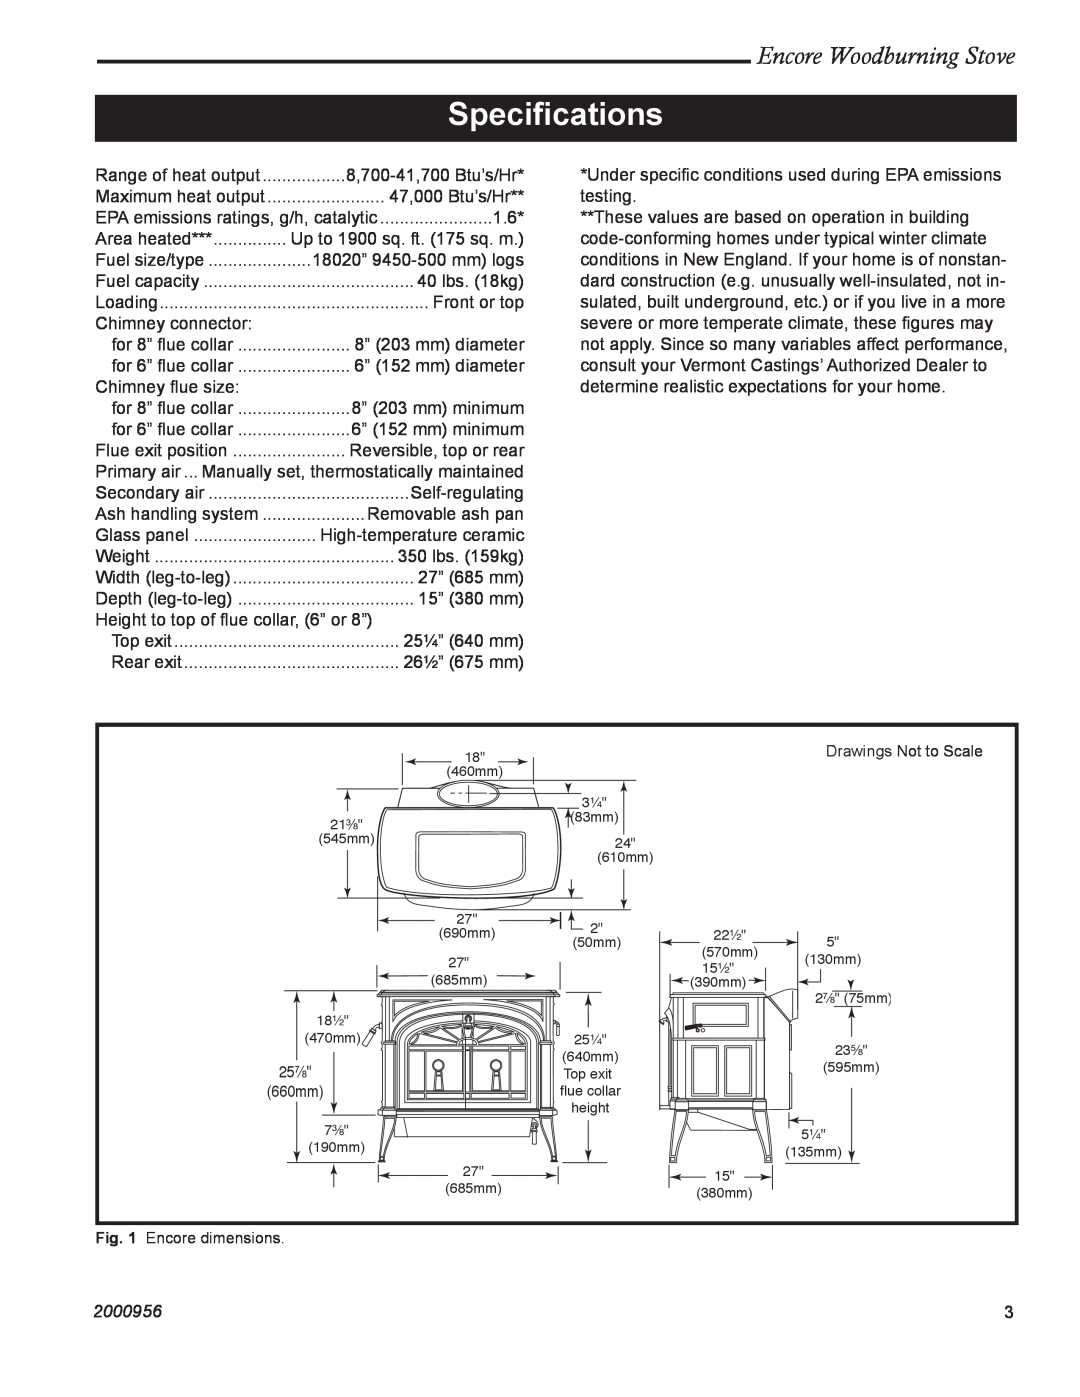 Vermont Casting 2550 installation instructions Speciﬁcations, Encore Woodburning Stove, 2000956 